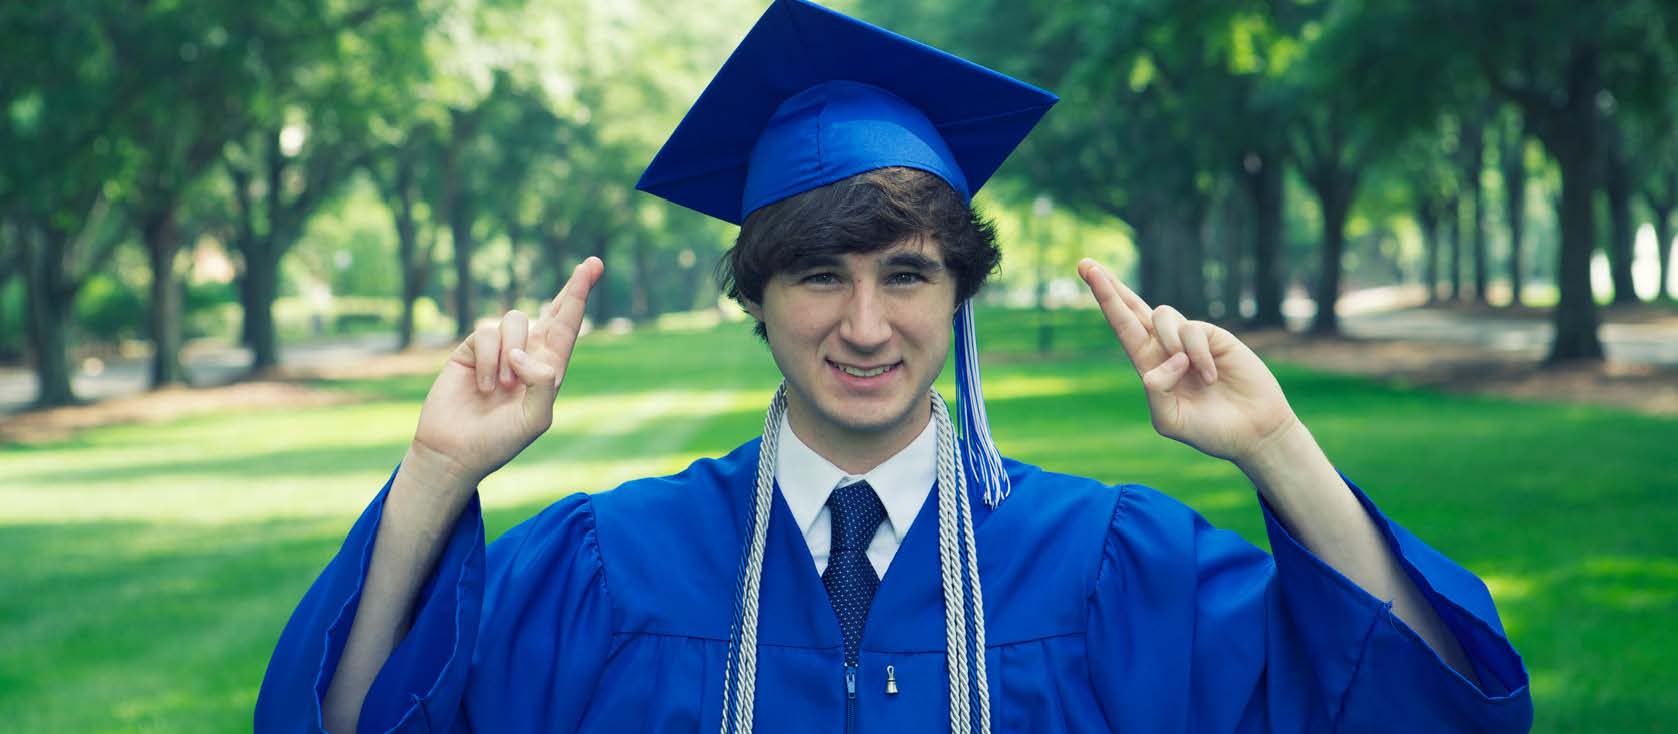 White man in blue grad cap and gown outside crossing fingers and smiling